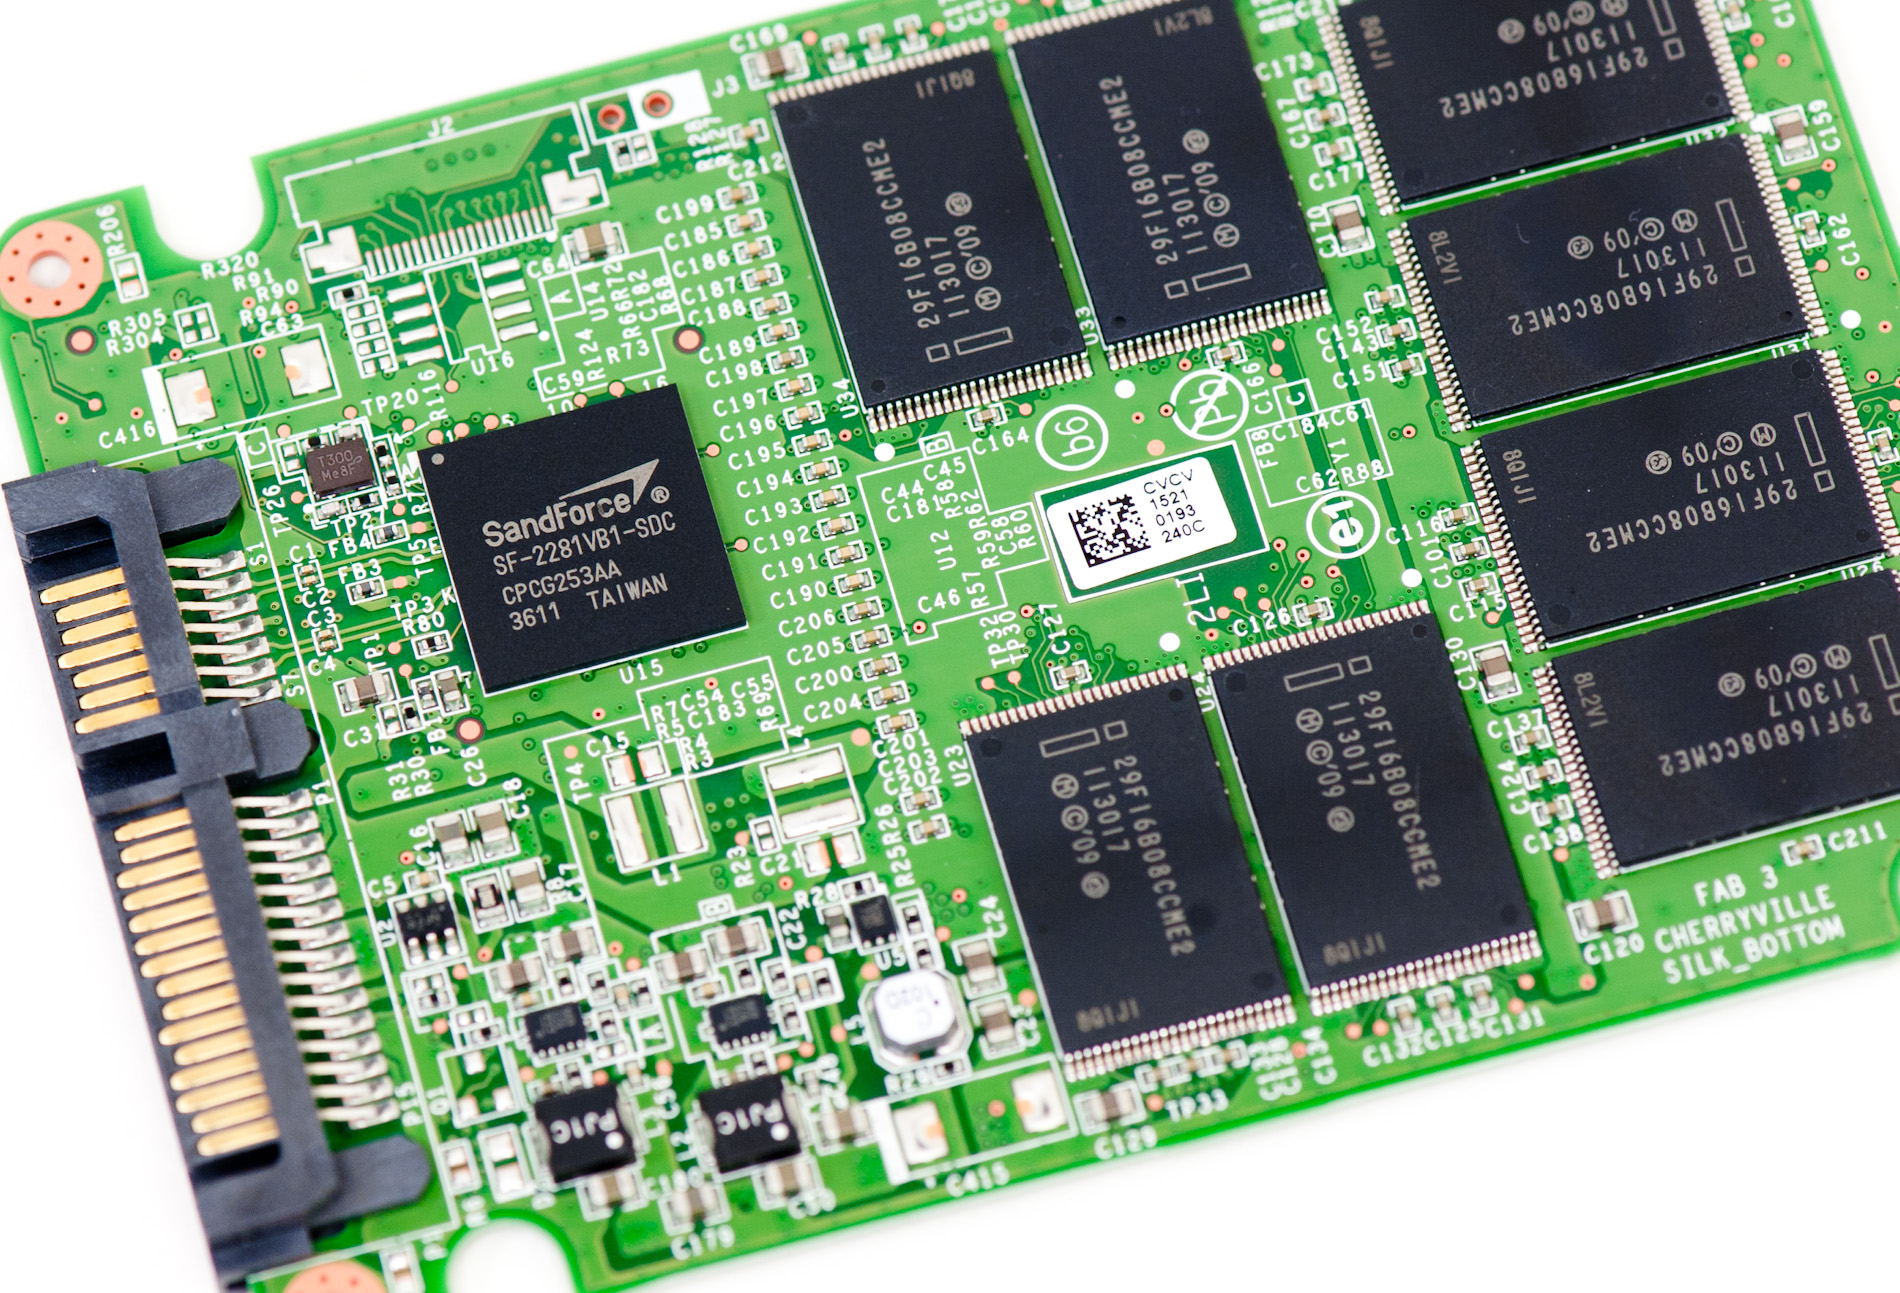 SSD 520 Review: Brings Reliability to